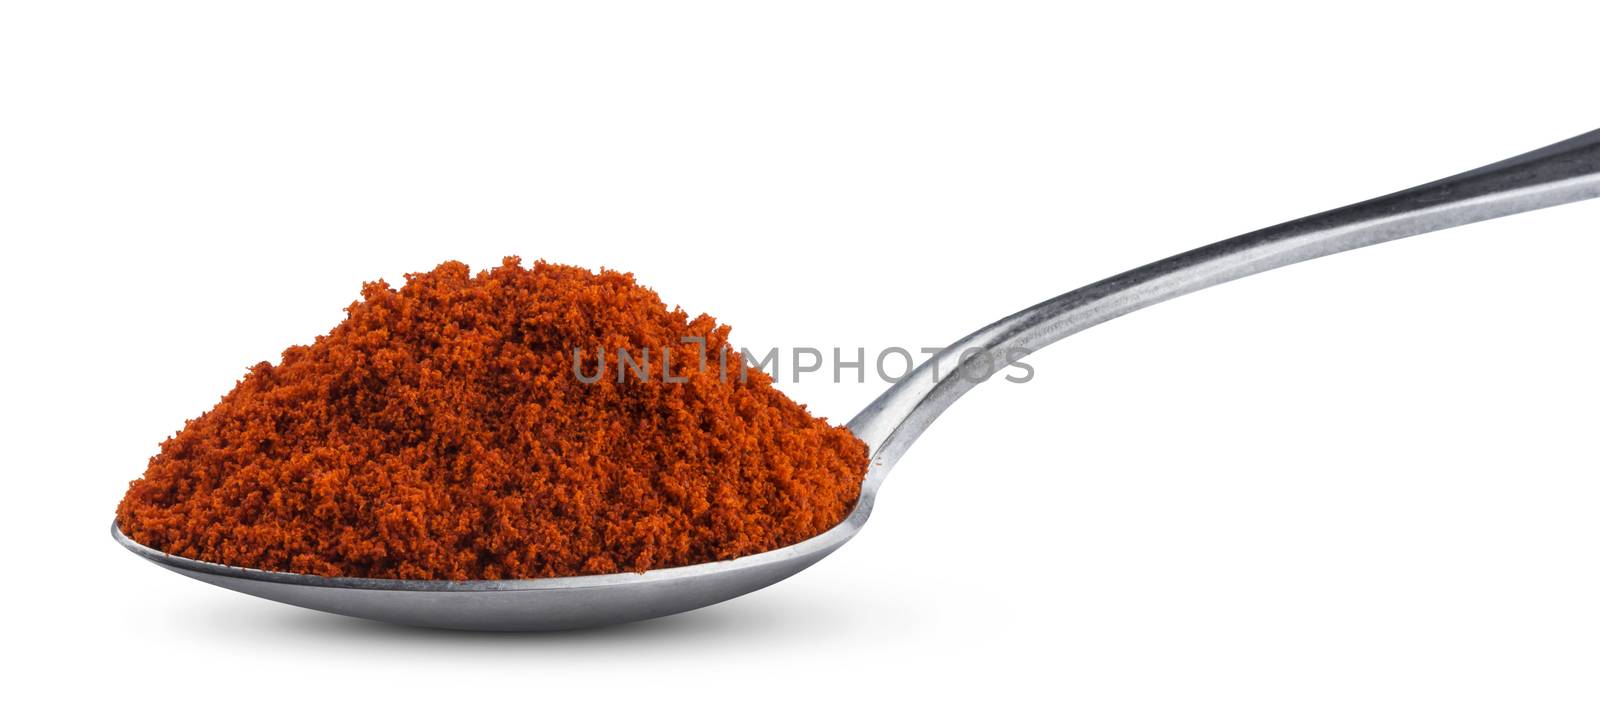 Ground red paprika in spoon isolated on white background by xamtiw